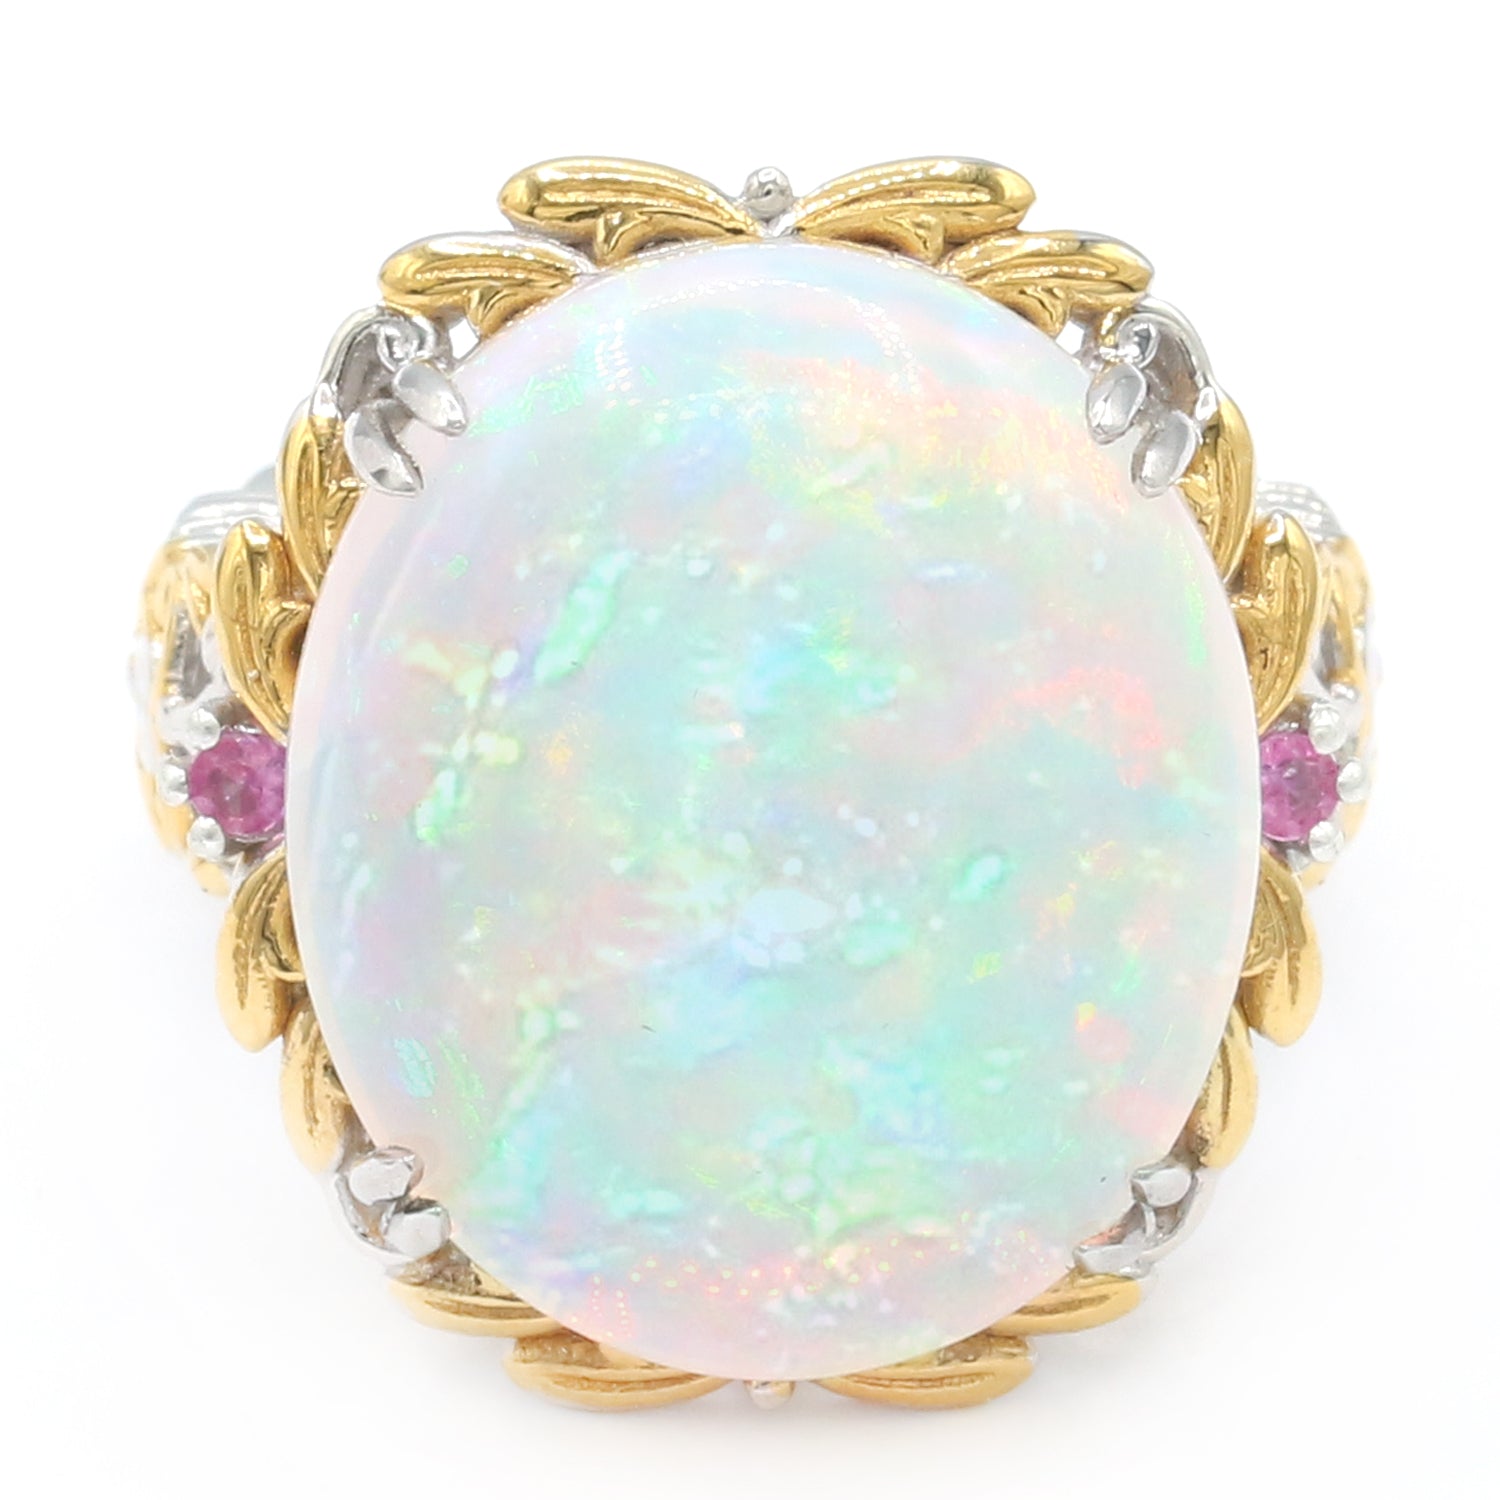 Limited Edition Gems en Vogue Luxe, One-of-a-Kind 16.82ctw Ethiopian Opal & Ruby Ring